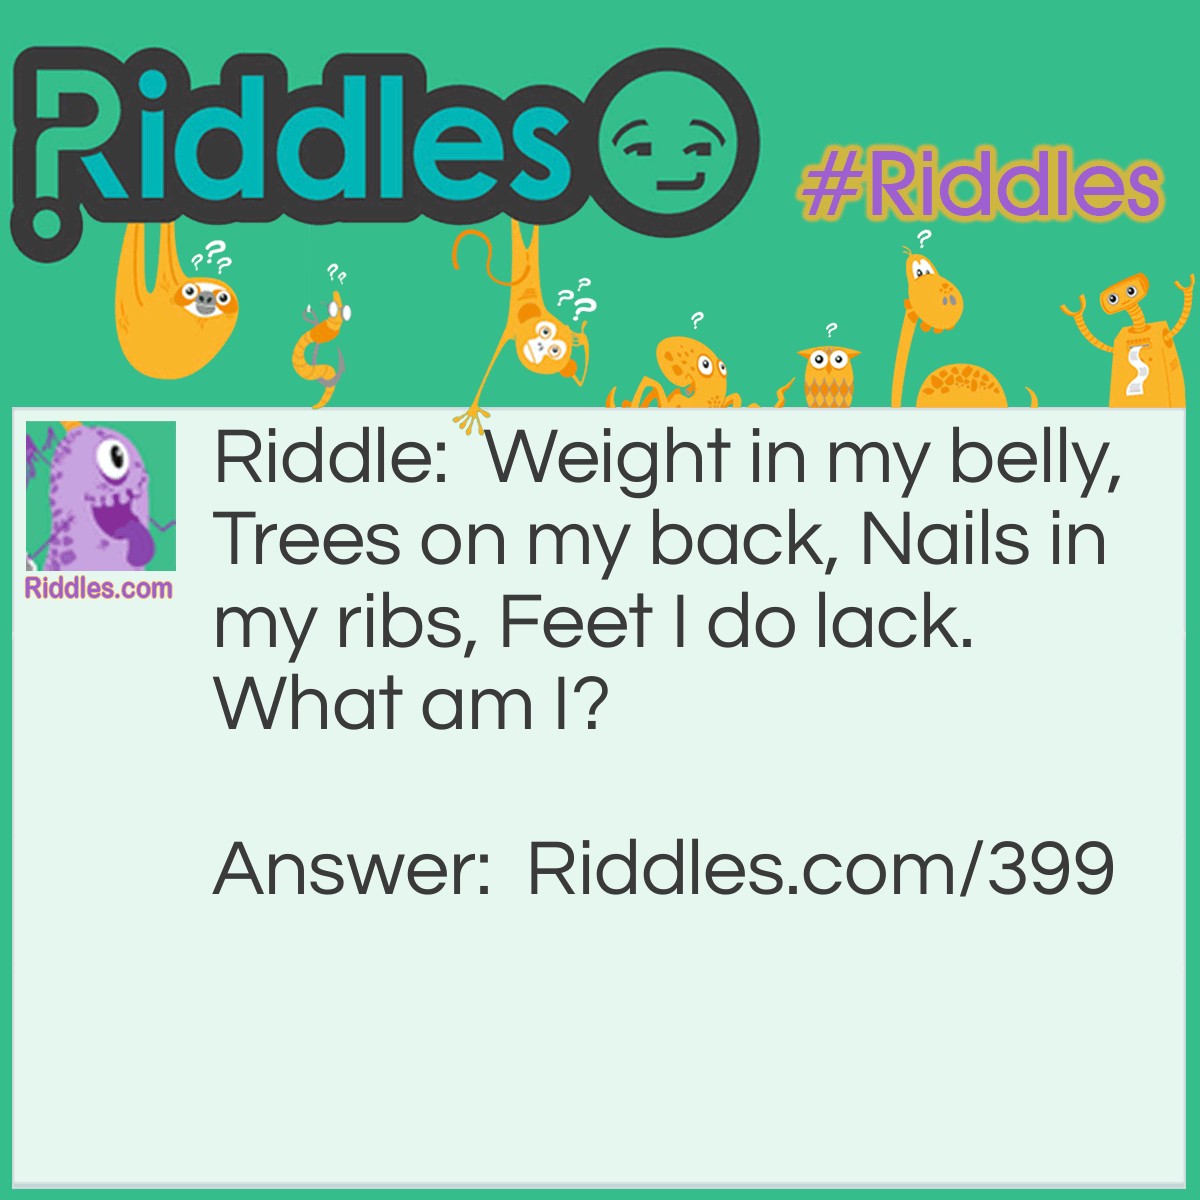 Riddle: Weight in my belly, Trees on my back, Nails in my ribs, Feet I do lack. What am I? Answer: A ship.